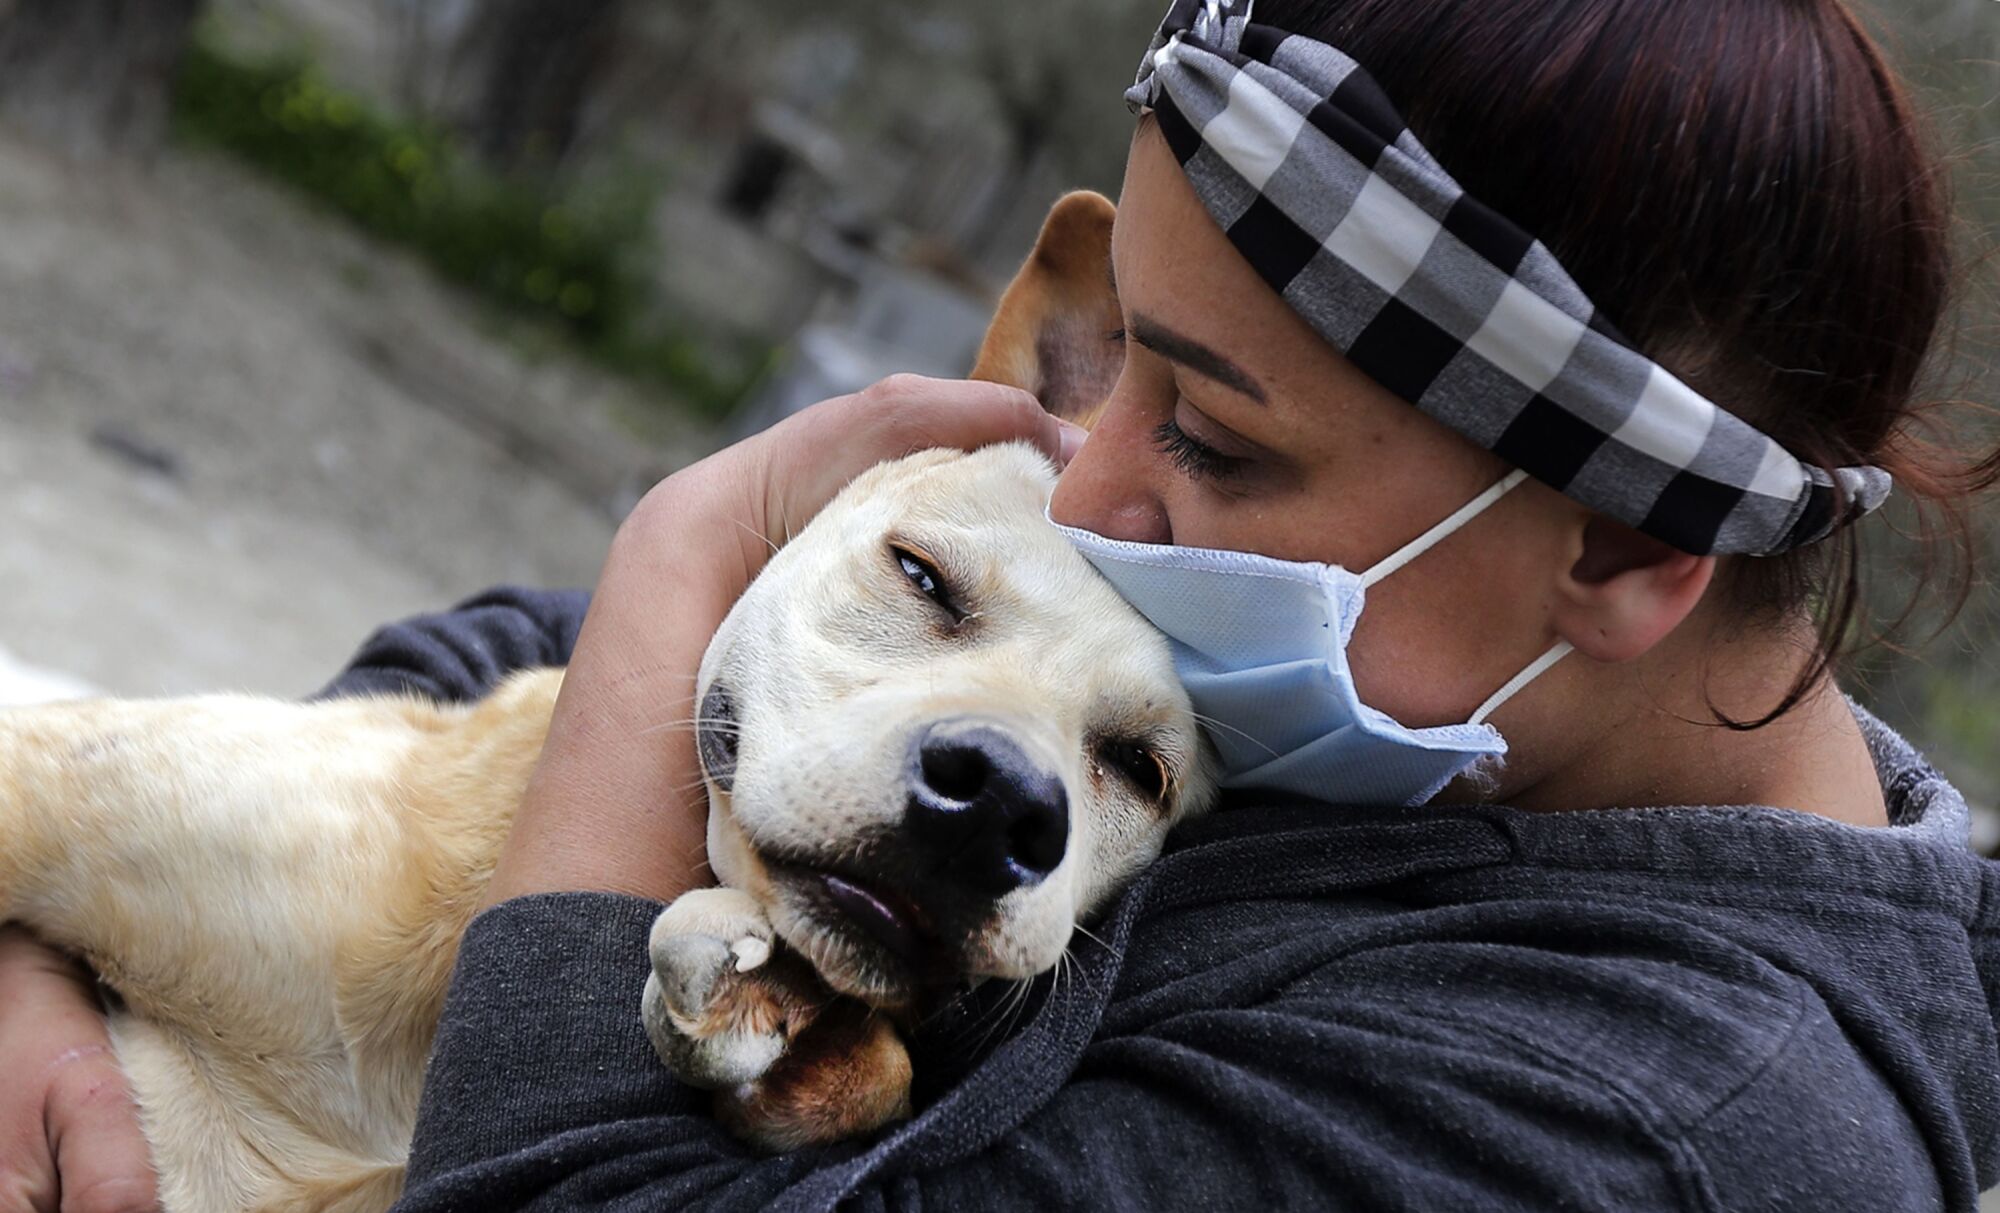 LEBANON: Zaynab Razzouk, head of the animal protection NGO Carma, hugs a dog at the shelter in the area of Koura, north of the Lebanese capital Beirut on April 3, 2020. - According to Razzouk, dogs and cats are getting dumped every day as a result of the outbreak of Covid-19.